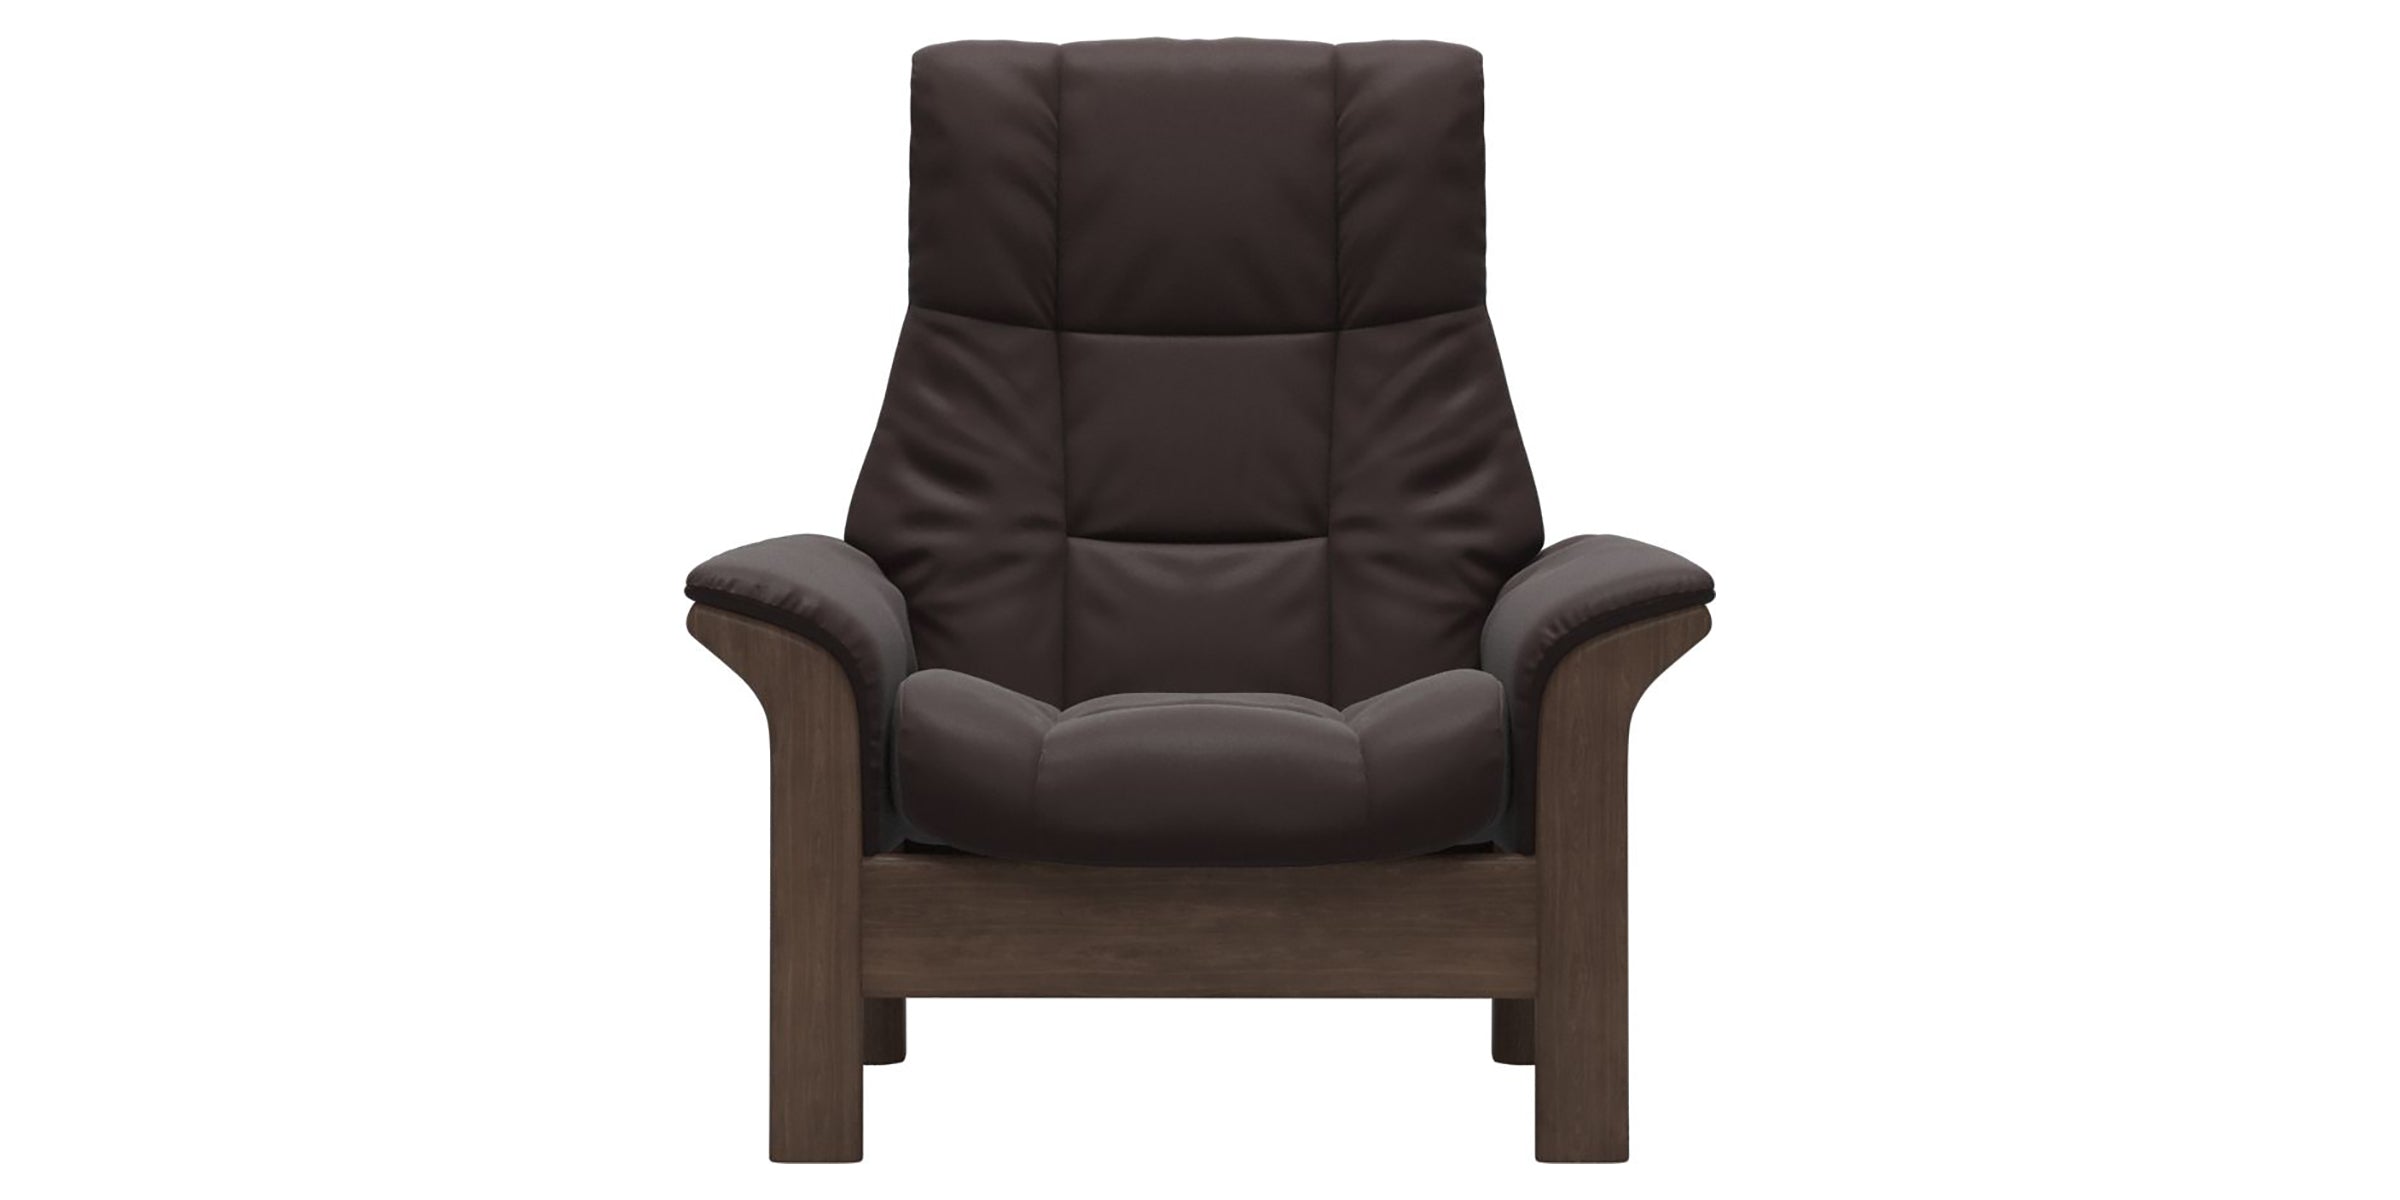 Paloma Leather Chocolate and Walnut Base | Stressless Windsor High Back Chair | Valley Ridge Furniture